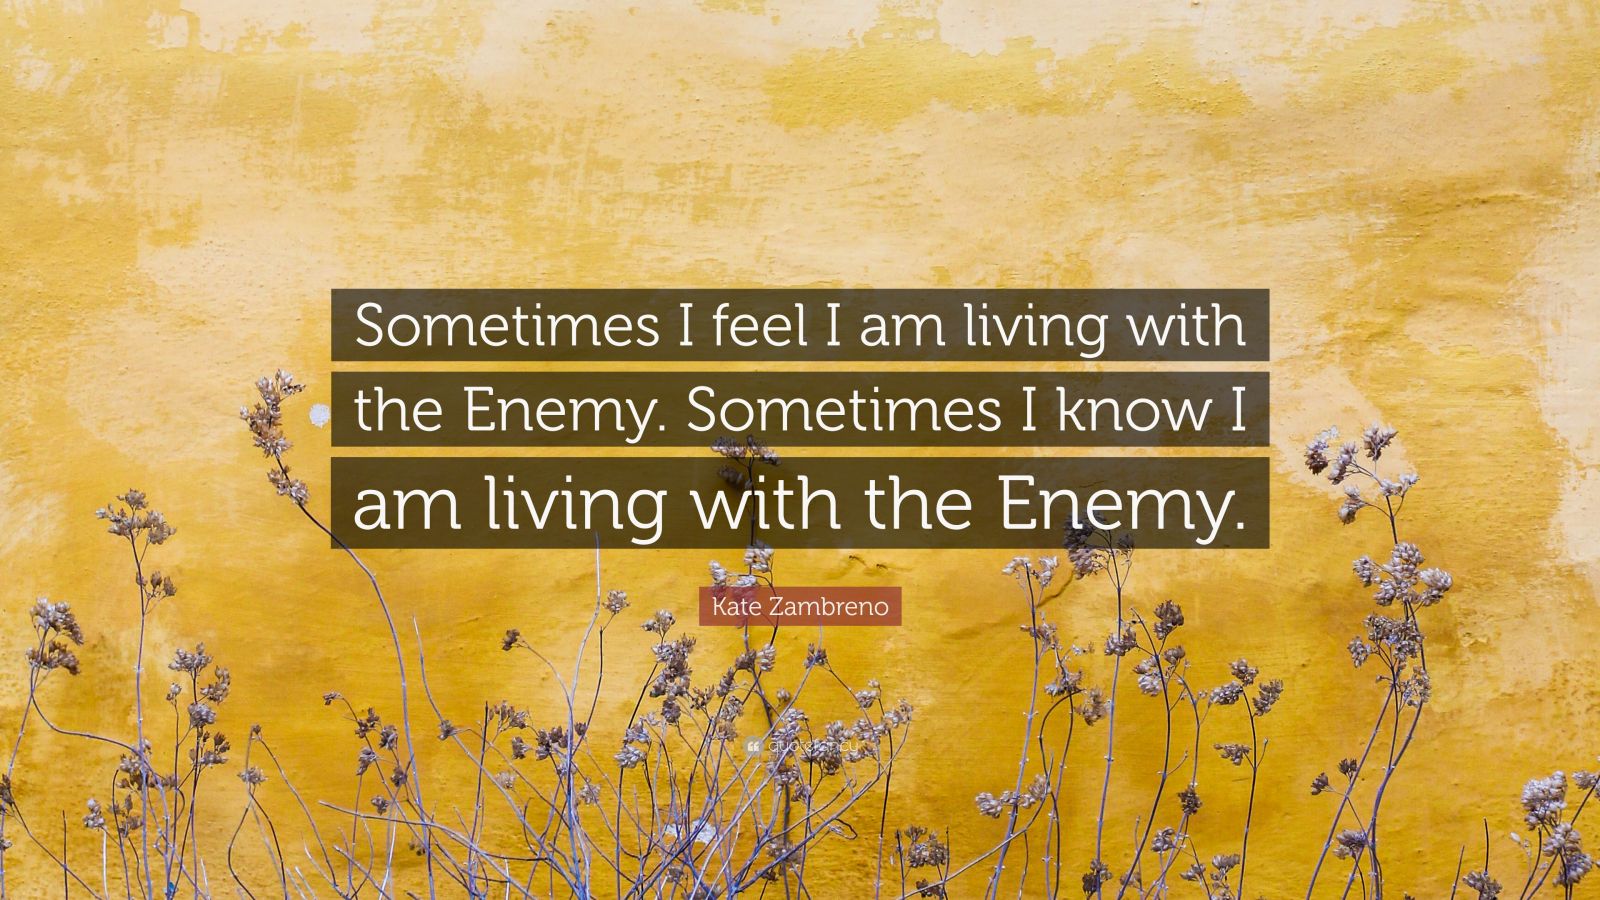 https://quotefancy.com/media/wallpaper/1600x900/6619438-Kate-Zambreno-Quote-Sometimes-I-feel-I-am-living-with-the-Enemy.jpg